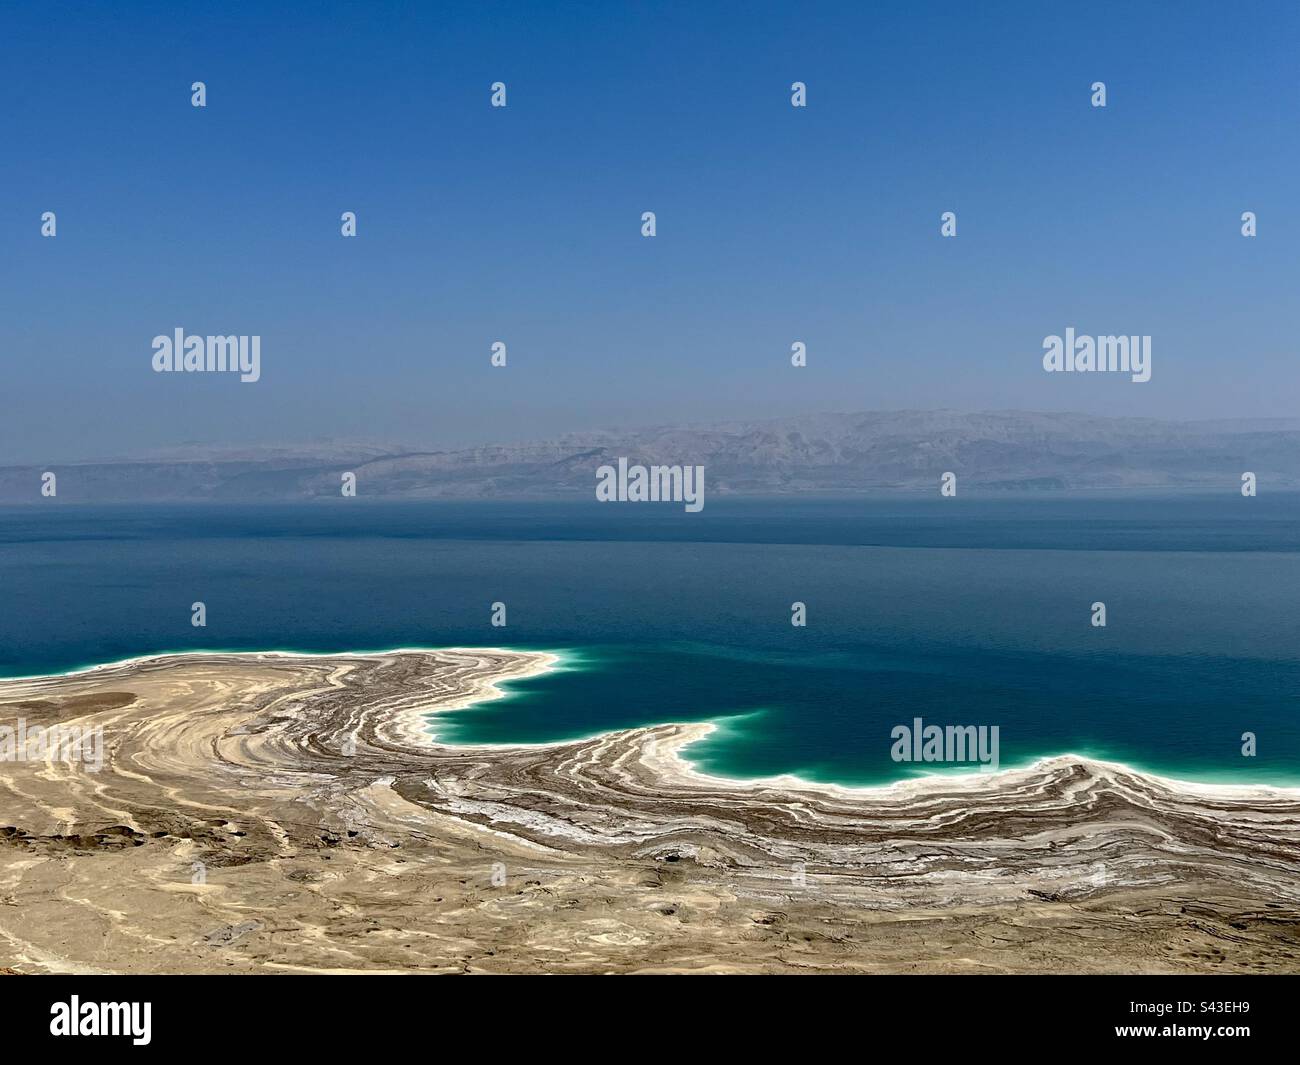 The impact of climate change at the Dead Sea Stock Photo